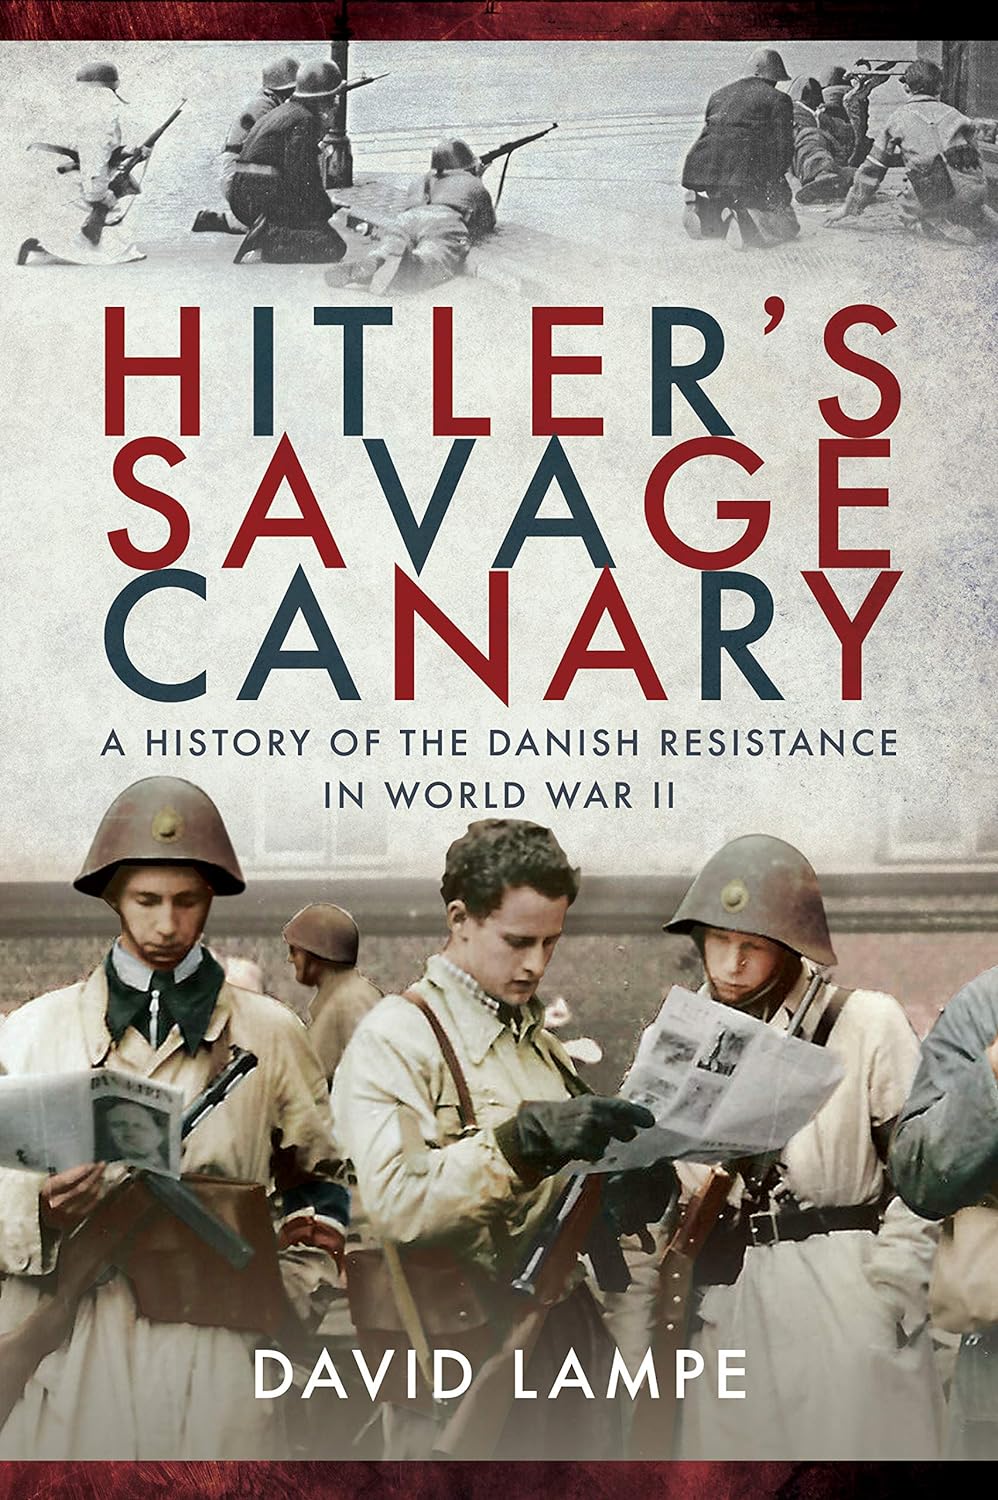 Hitler's Savage Canary : A History of the Danish Resistance in World War II